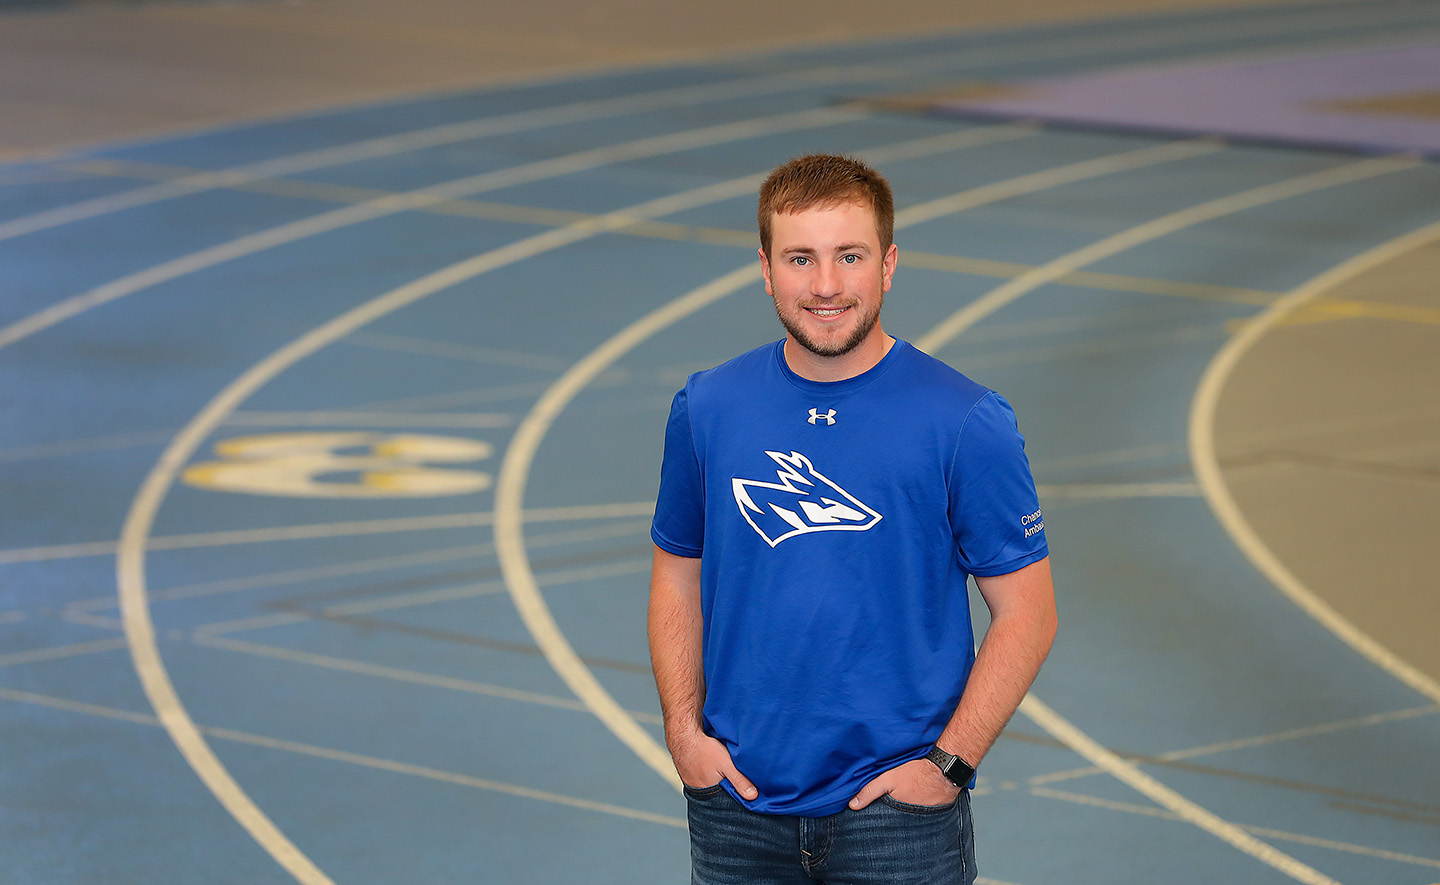 UNK senior Nate Grimm graduates Friday with a bachelor’s degree in psychology and a minor in coaching. He plans to pursue a master’s degree in sport, exercise and performance psychology.